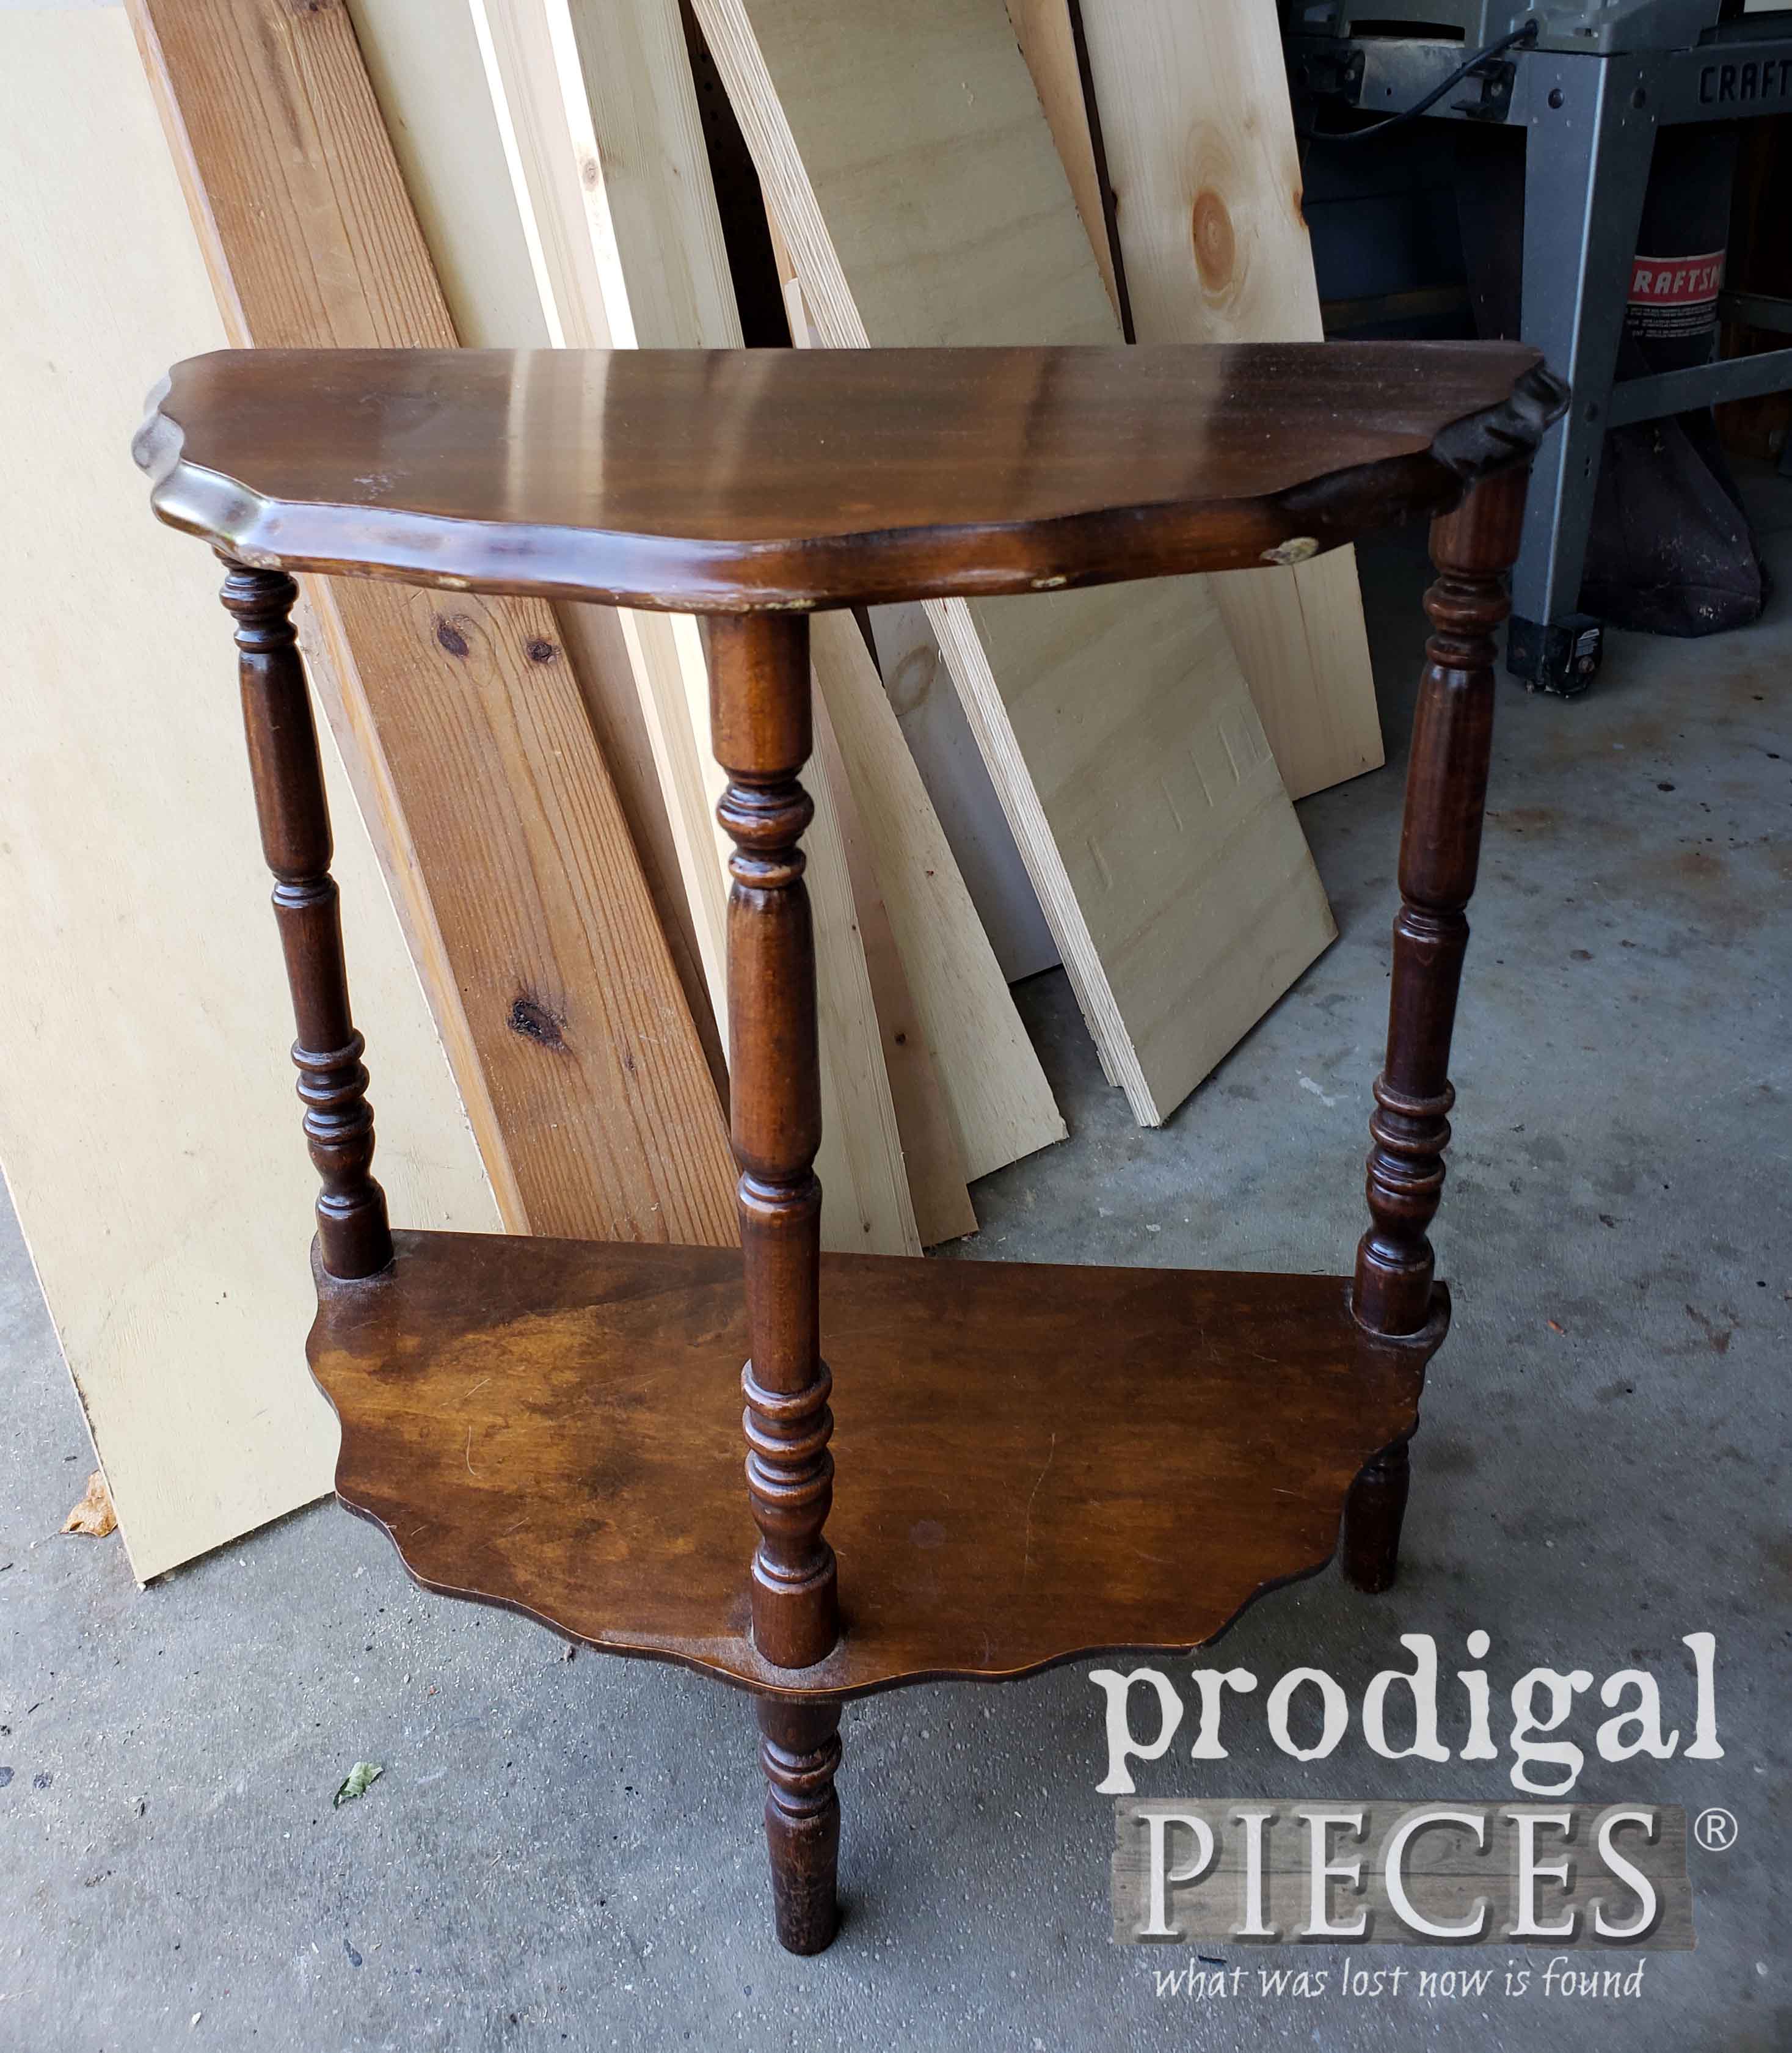 priority limbs Mr Damaged Table Top Repair & Update - Prodigal Pieces